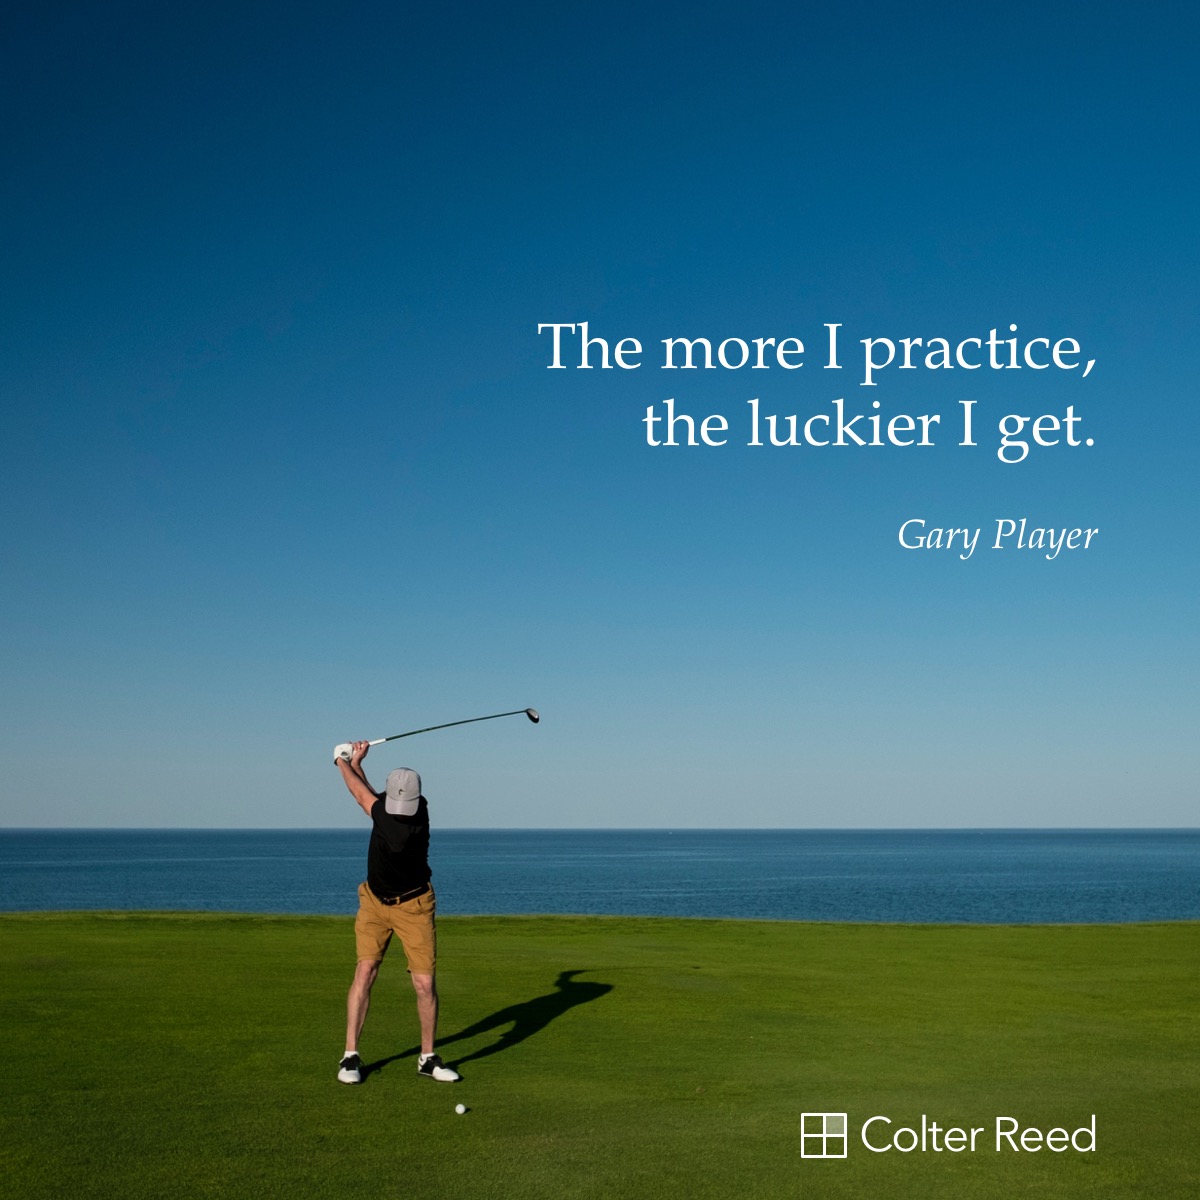 The more I practice, the luckier I get. —Gary Player